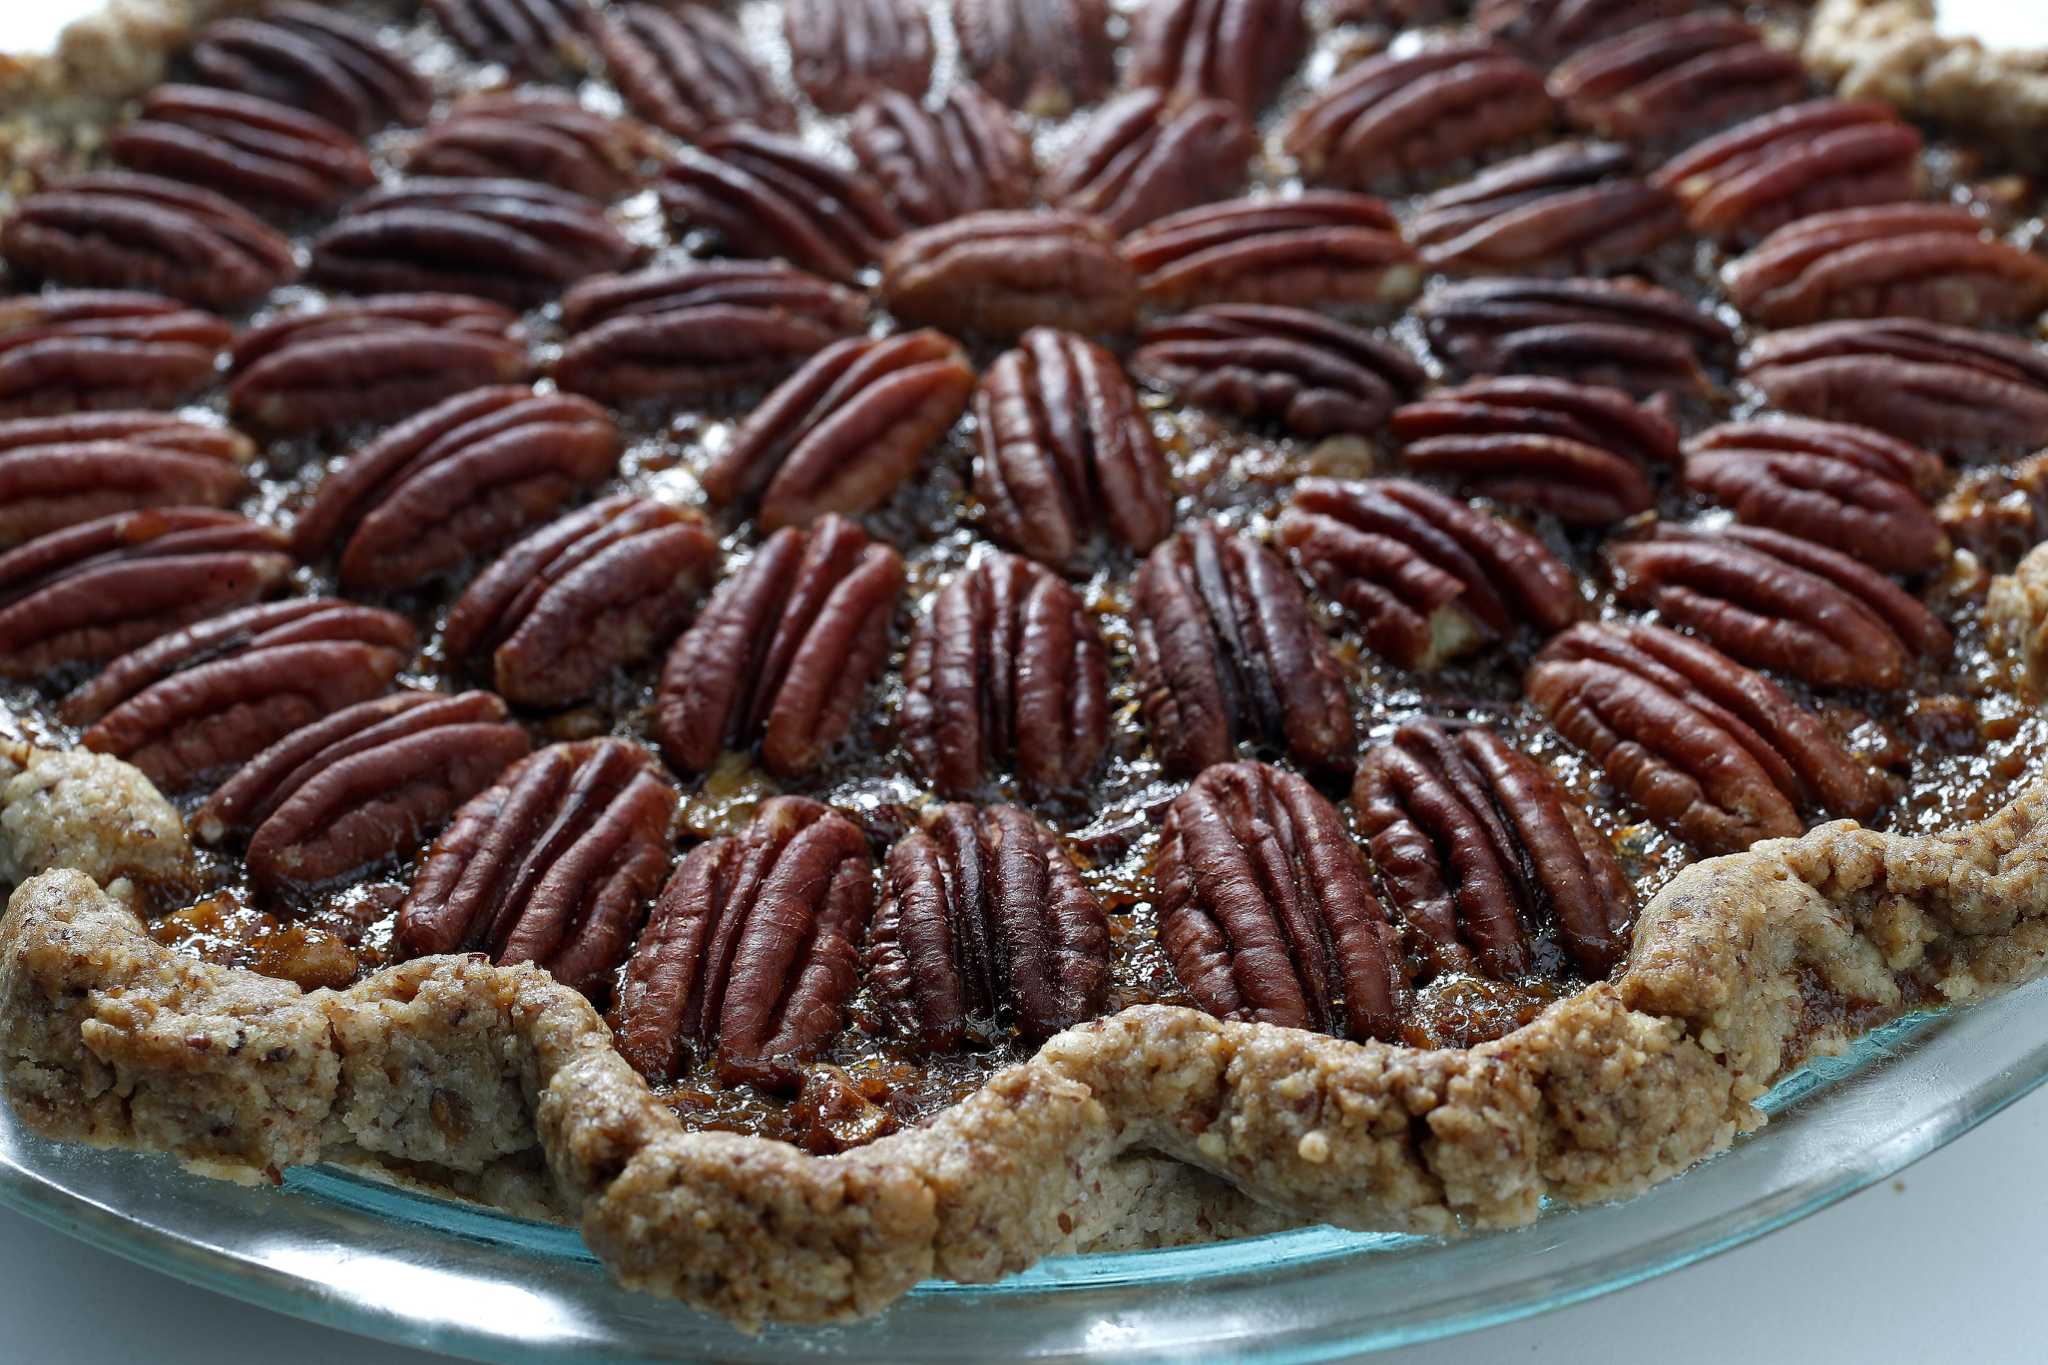 most-pecan-pies-are-short-on-pecans-but-hey-we-live-in-texas